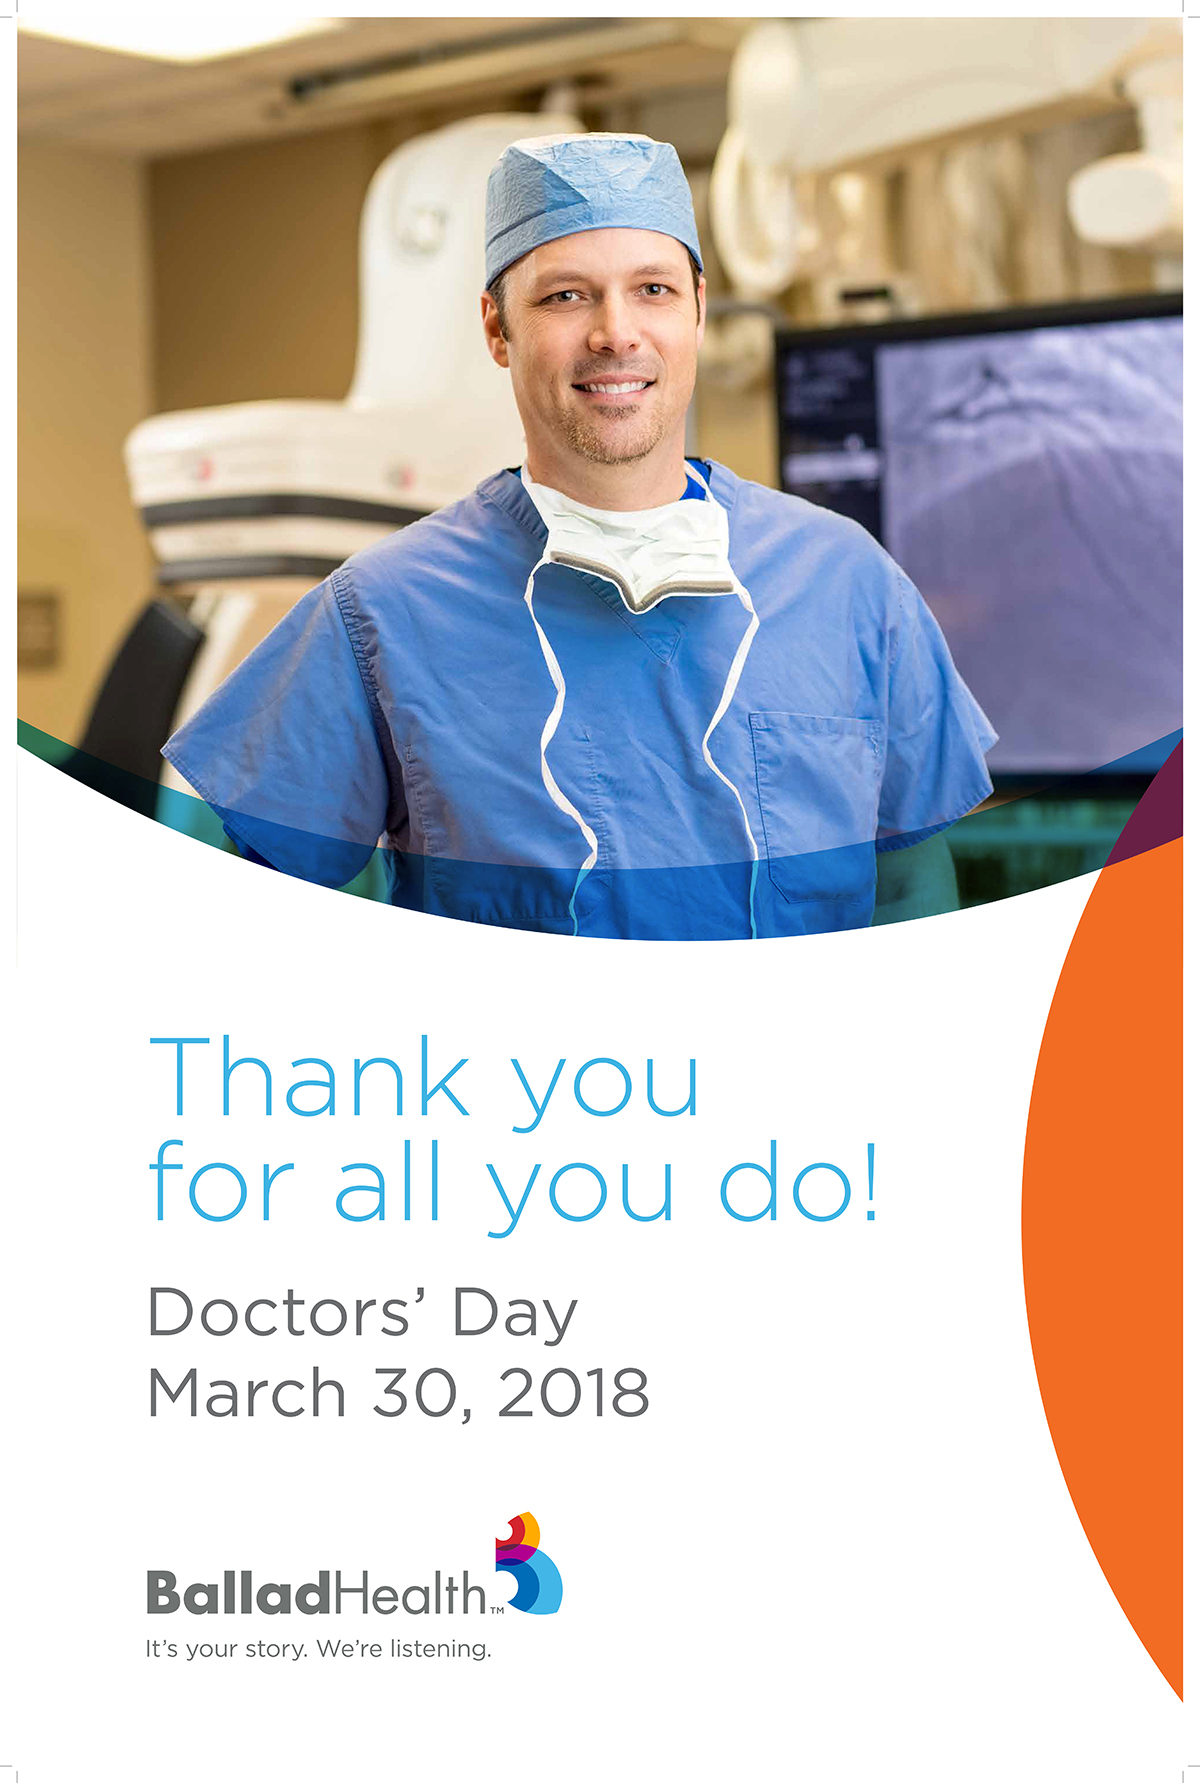 March 30 is National Doctors’ Day; we appreciate our physicians!